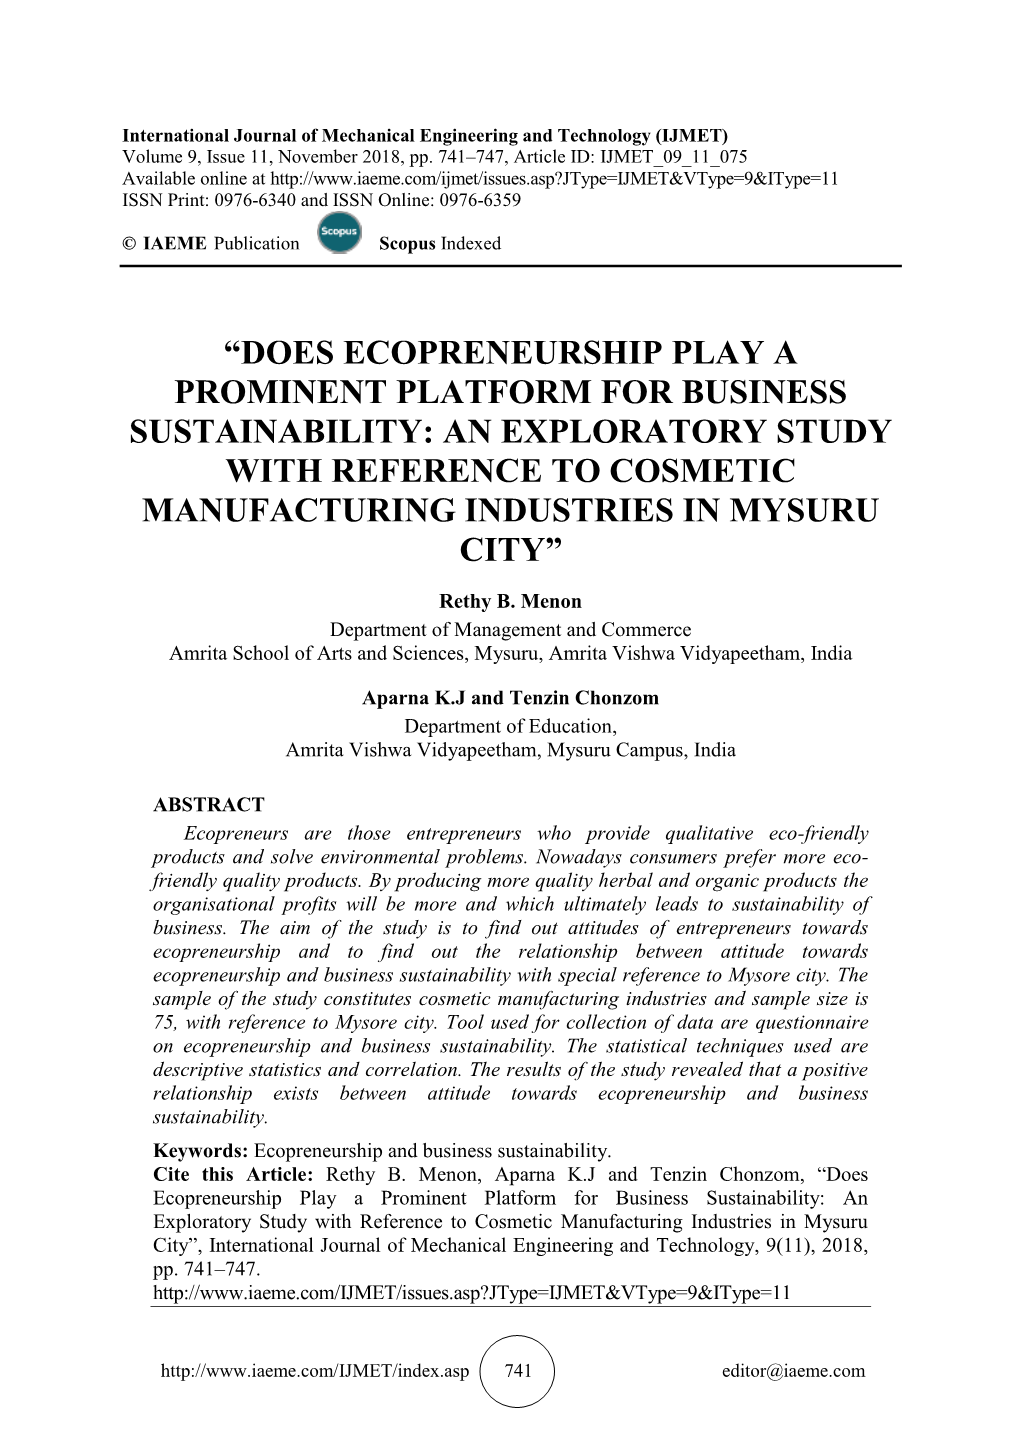 Does Ecopreneurship Play a Prominent Platform for Business Sustainability: an Exploratory Study with Reference to Cosmetic Manufacturing Industries in Mysuru City”